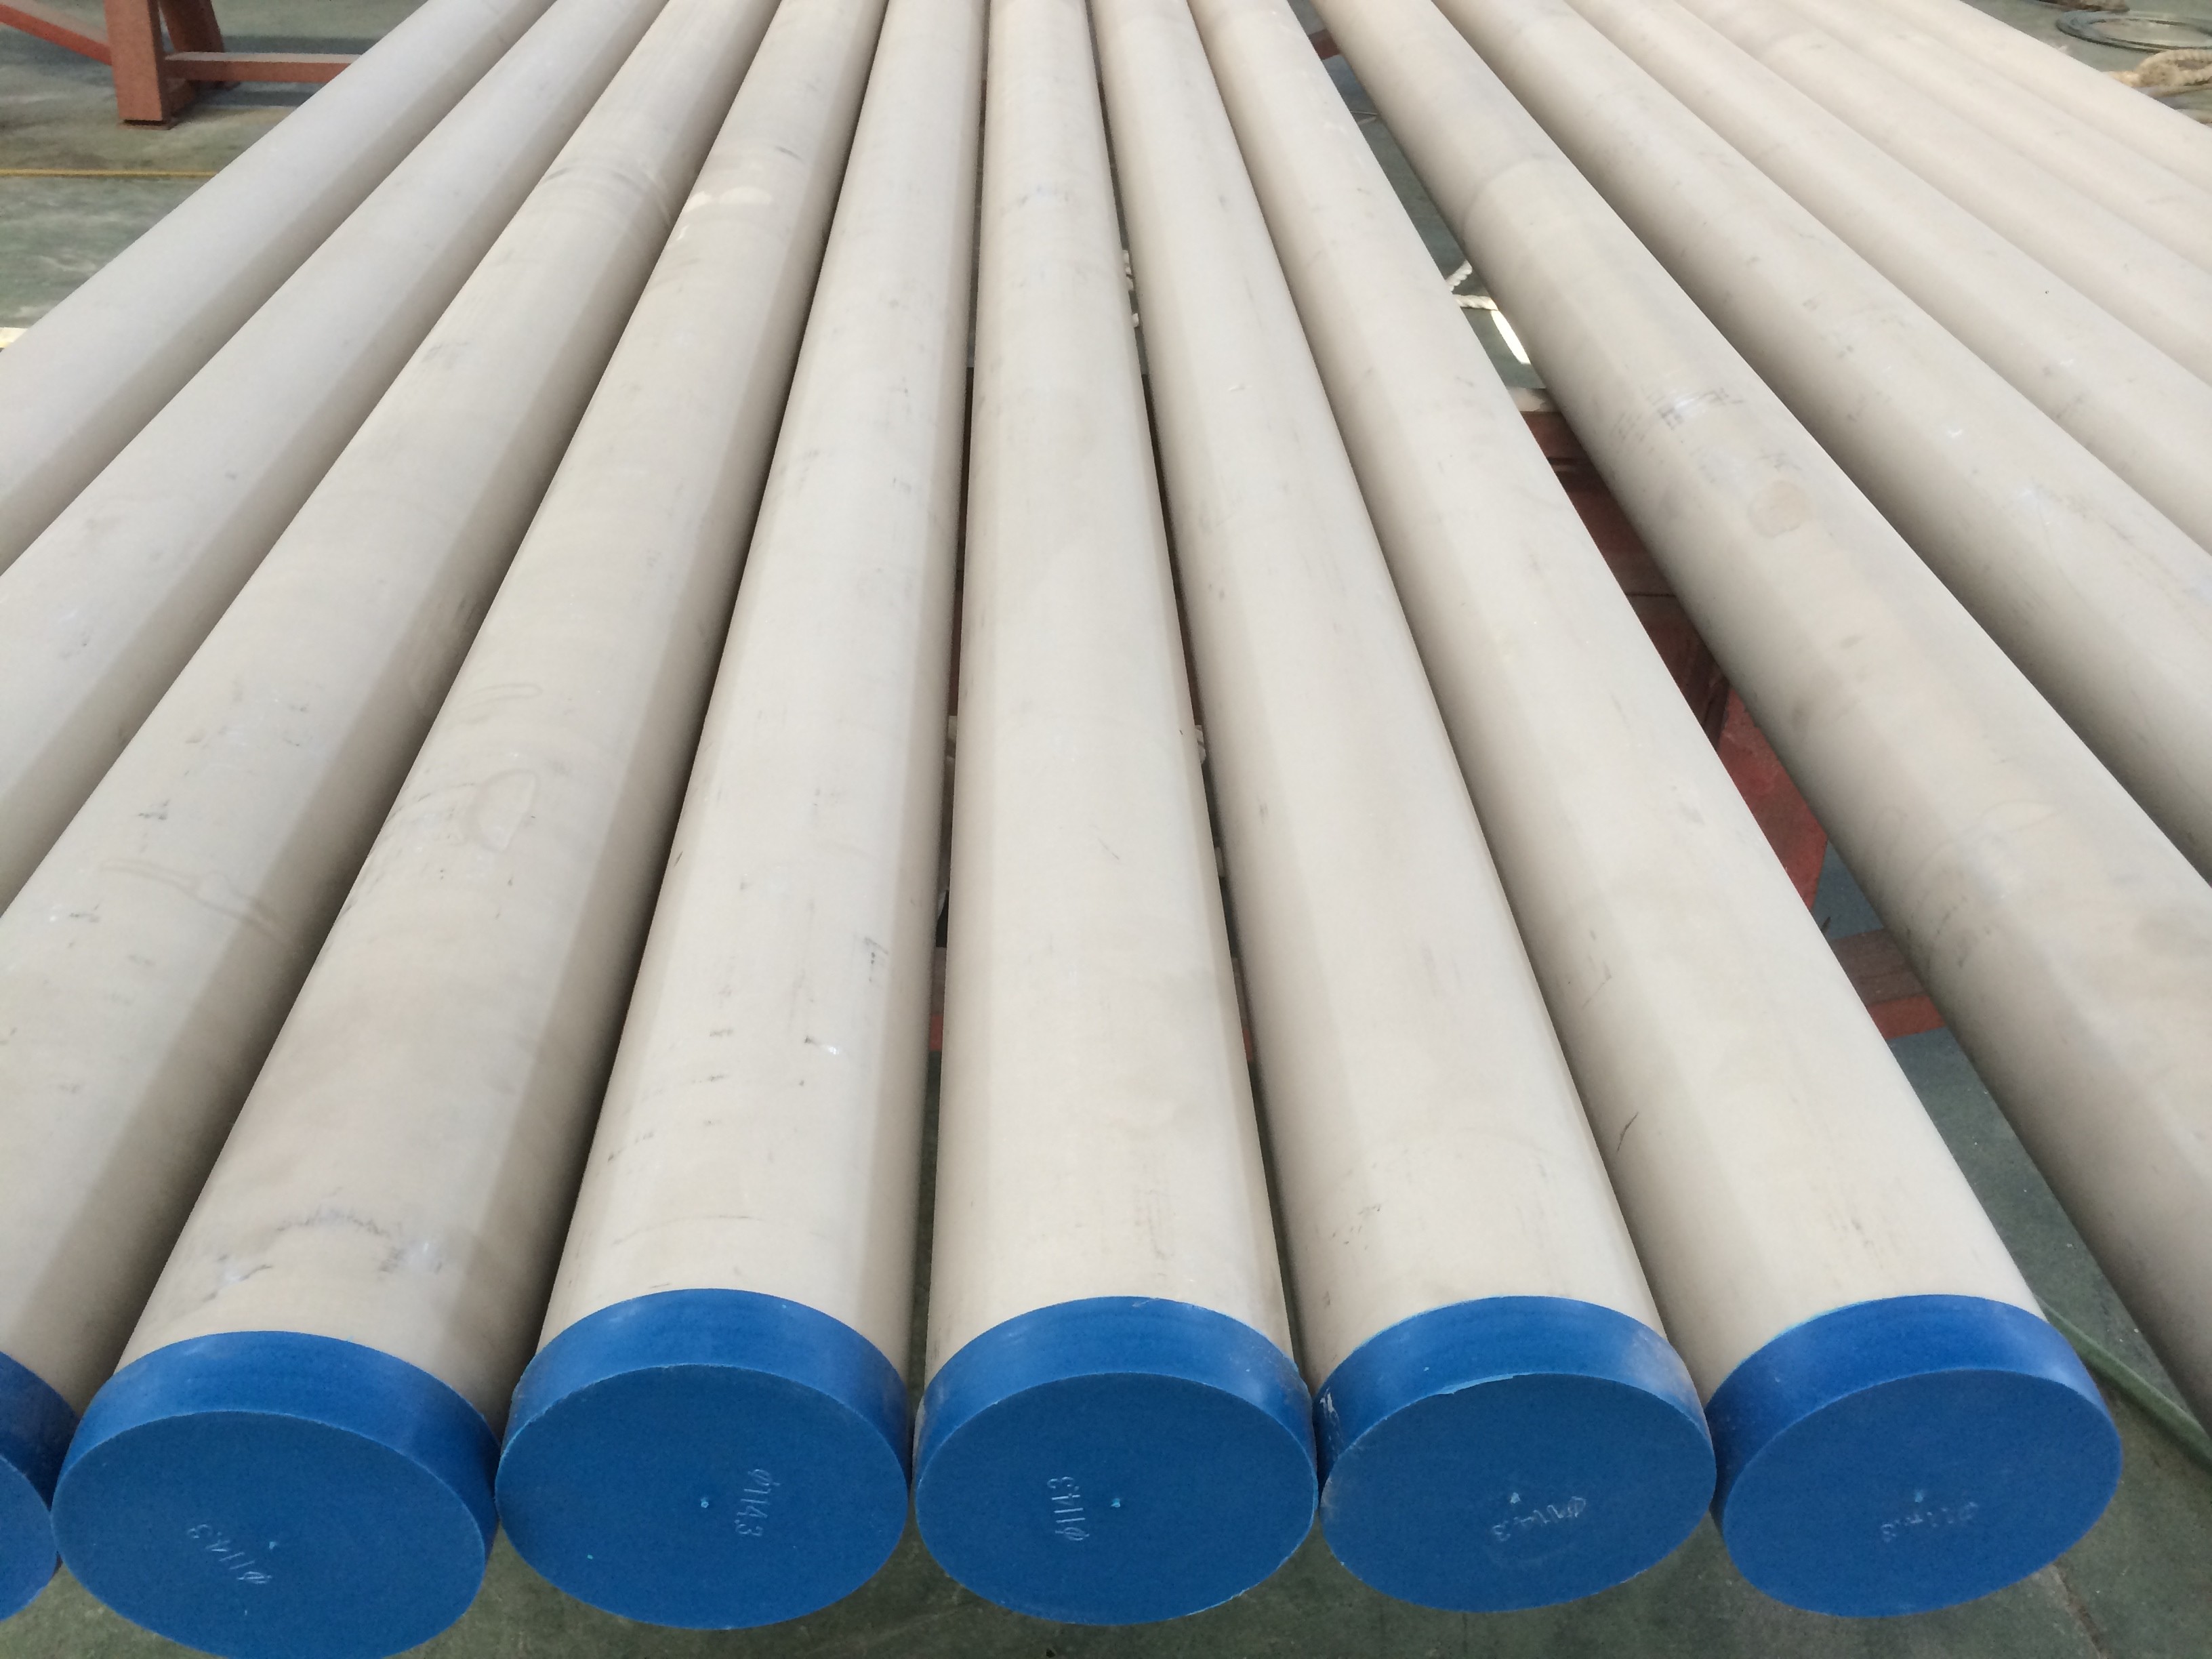 Quality Duplex Stainless Steel Pipe ,A/SA789, A/SA790, A/SA928,DIN17456/17458,EN10216-5 UNS S31803,S32205,S32101,S32304,S32750 for sale